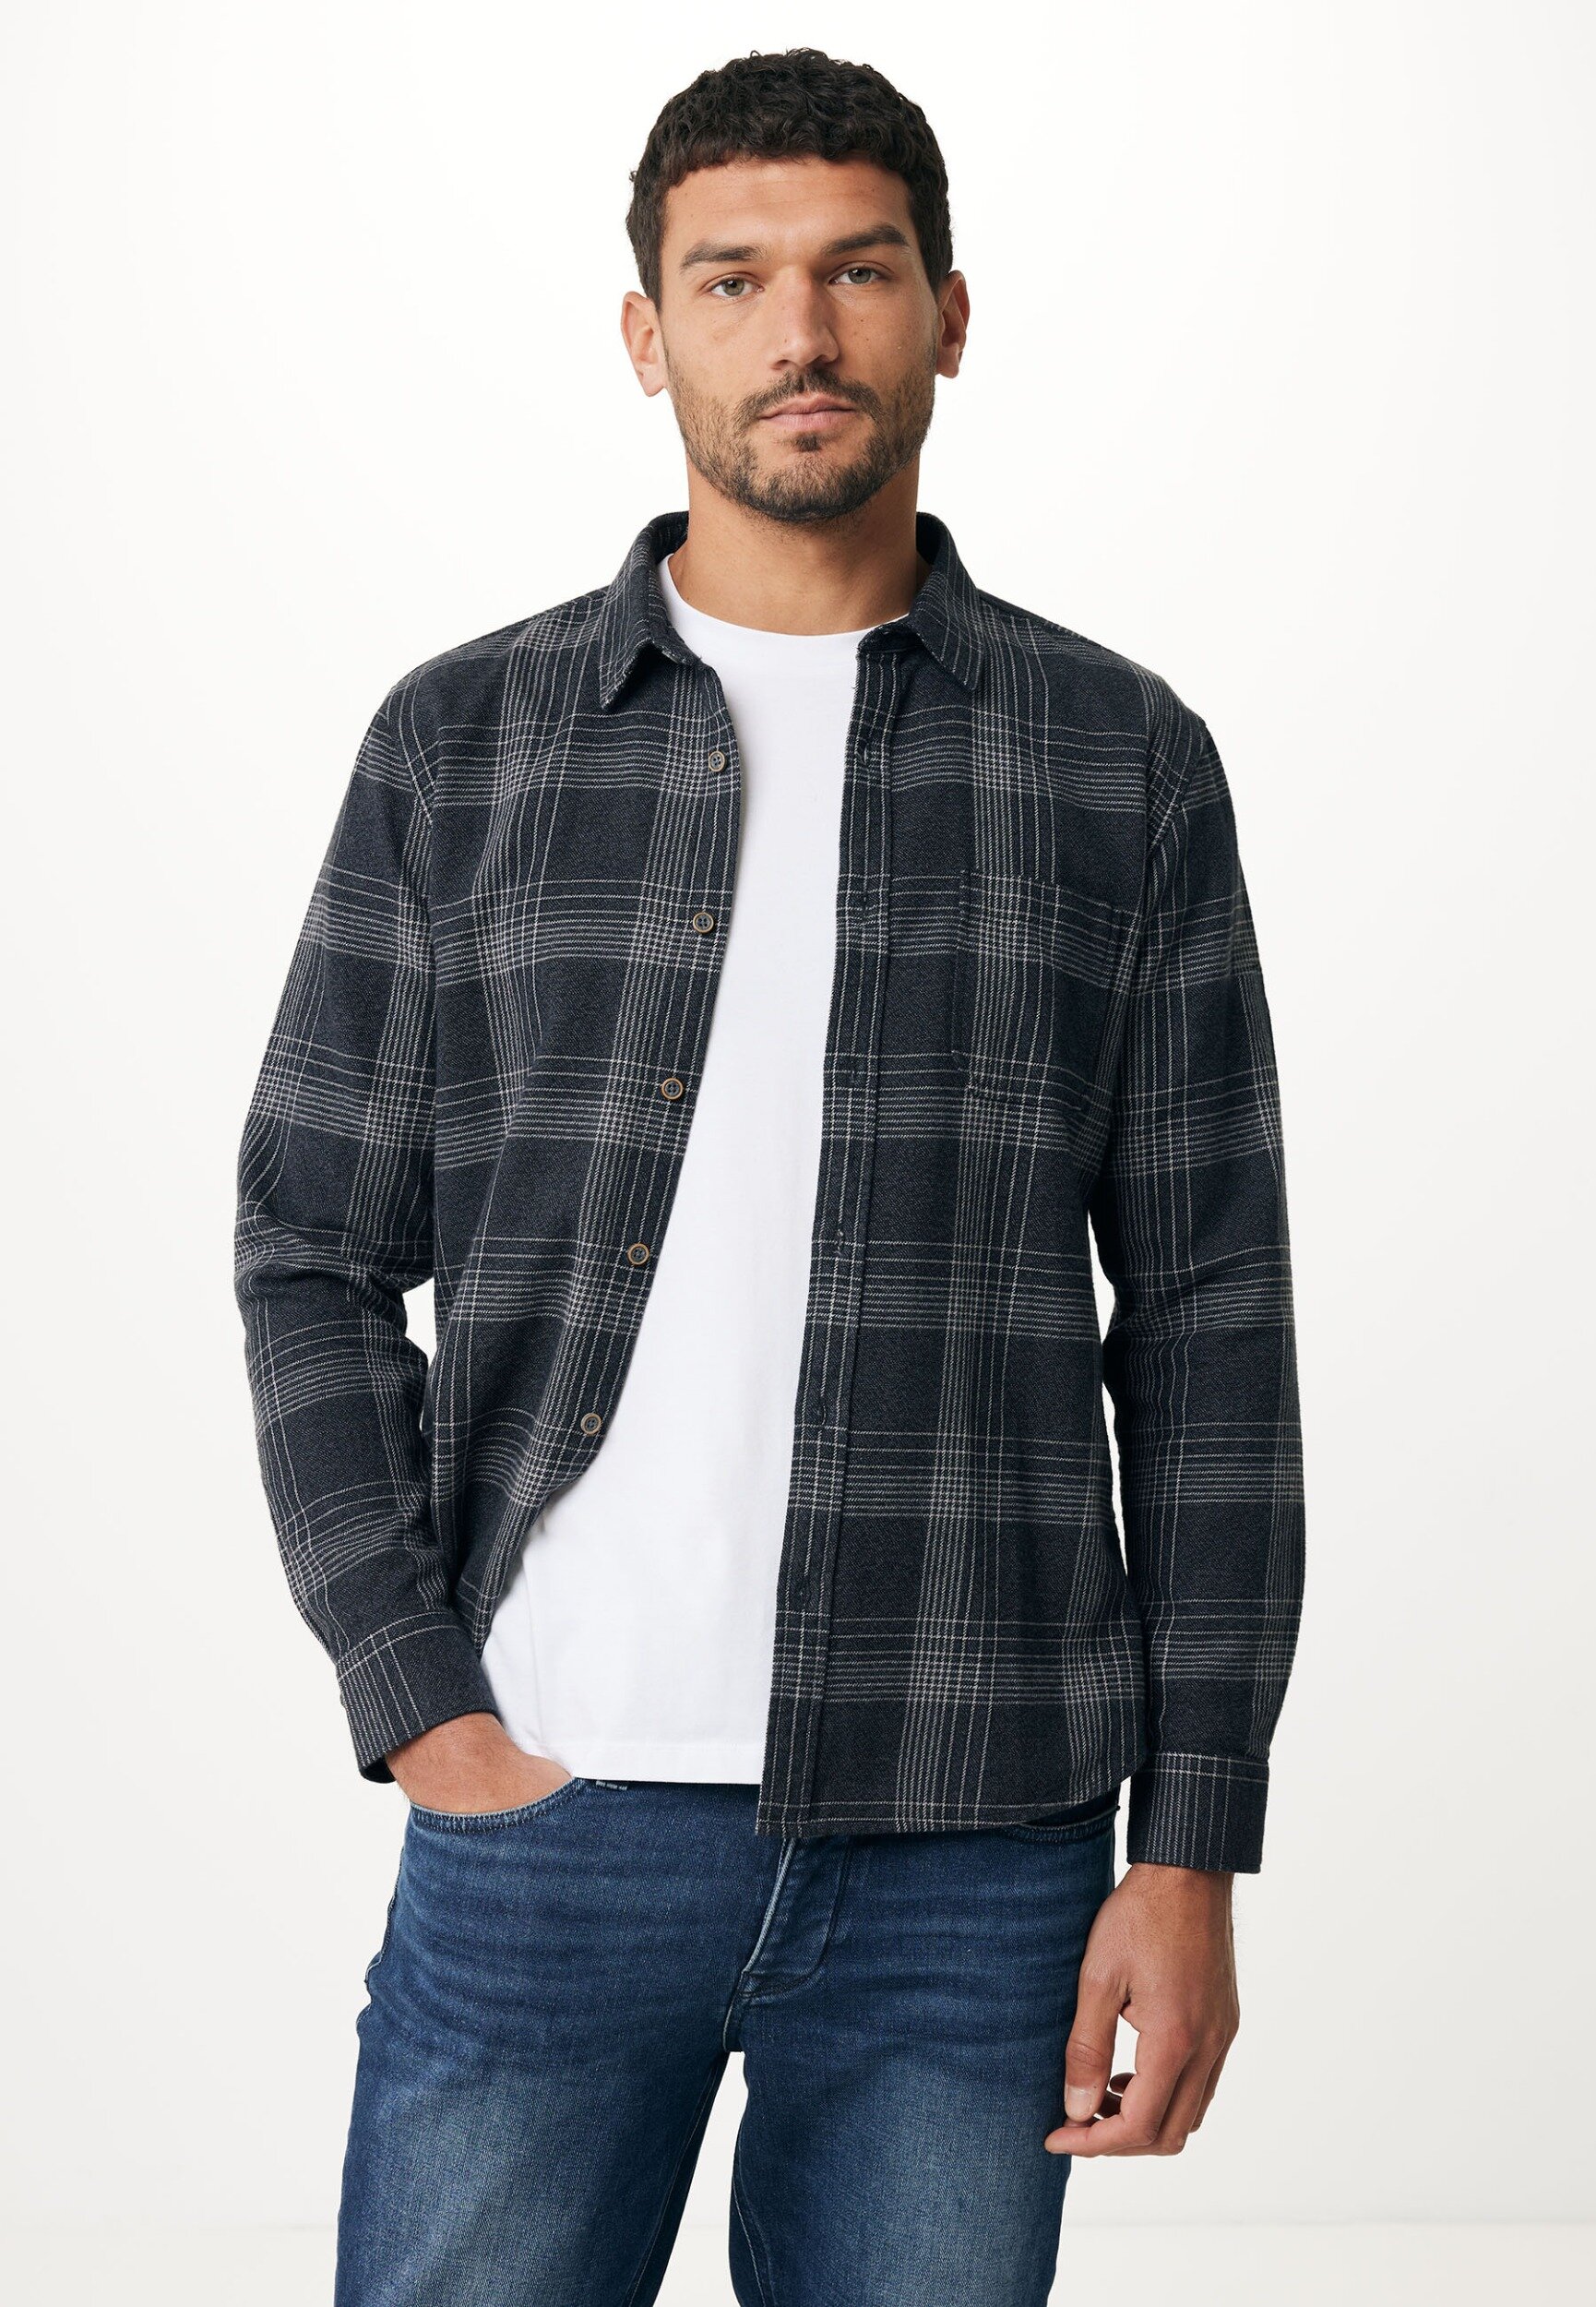 Mexx Lange Mouwen Flanel Check Overshirt With Pocket Mannen - Anthracite Melee - Maat M